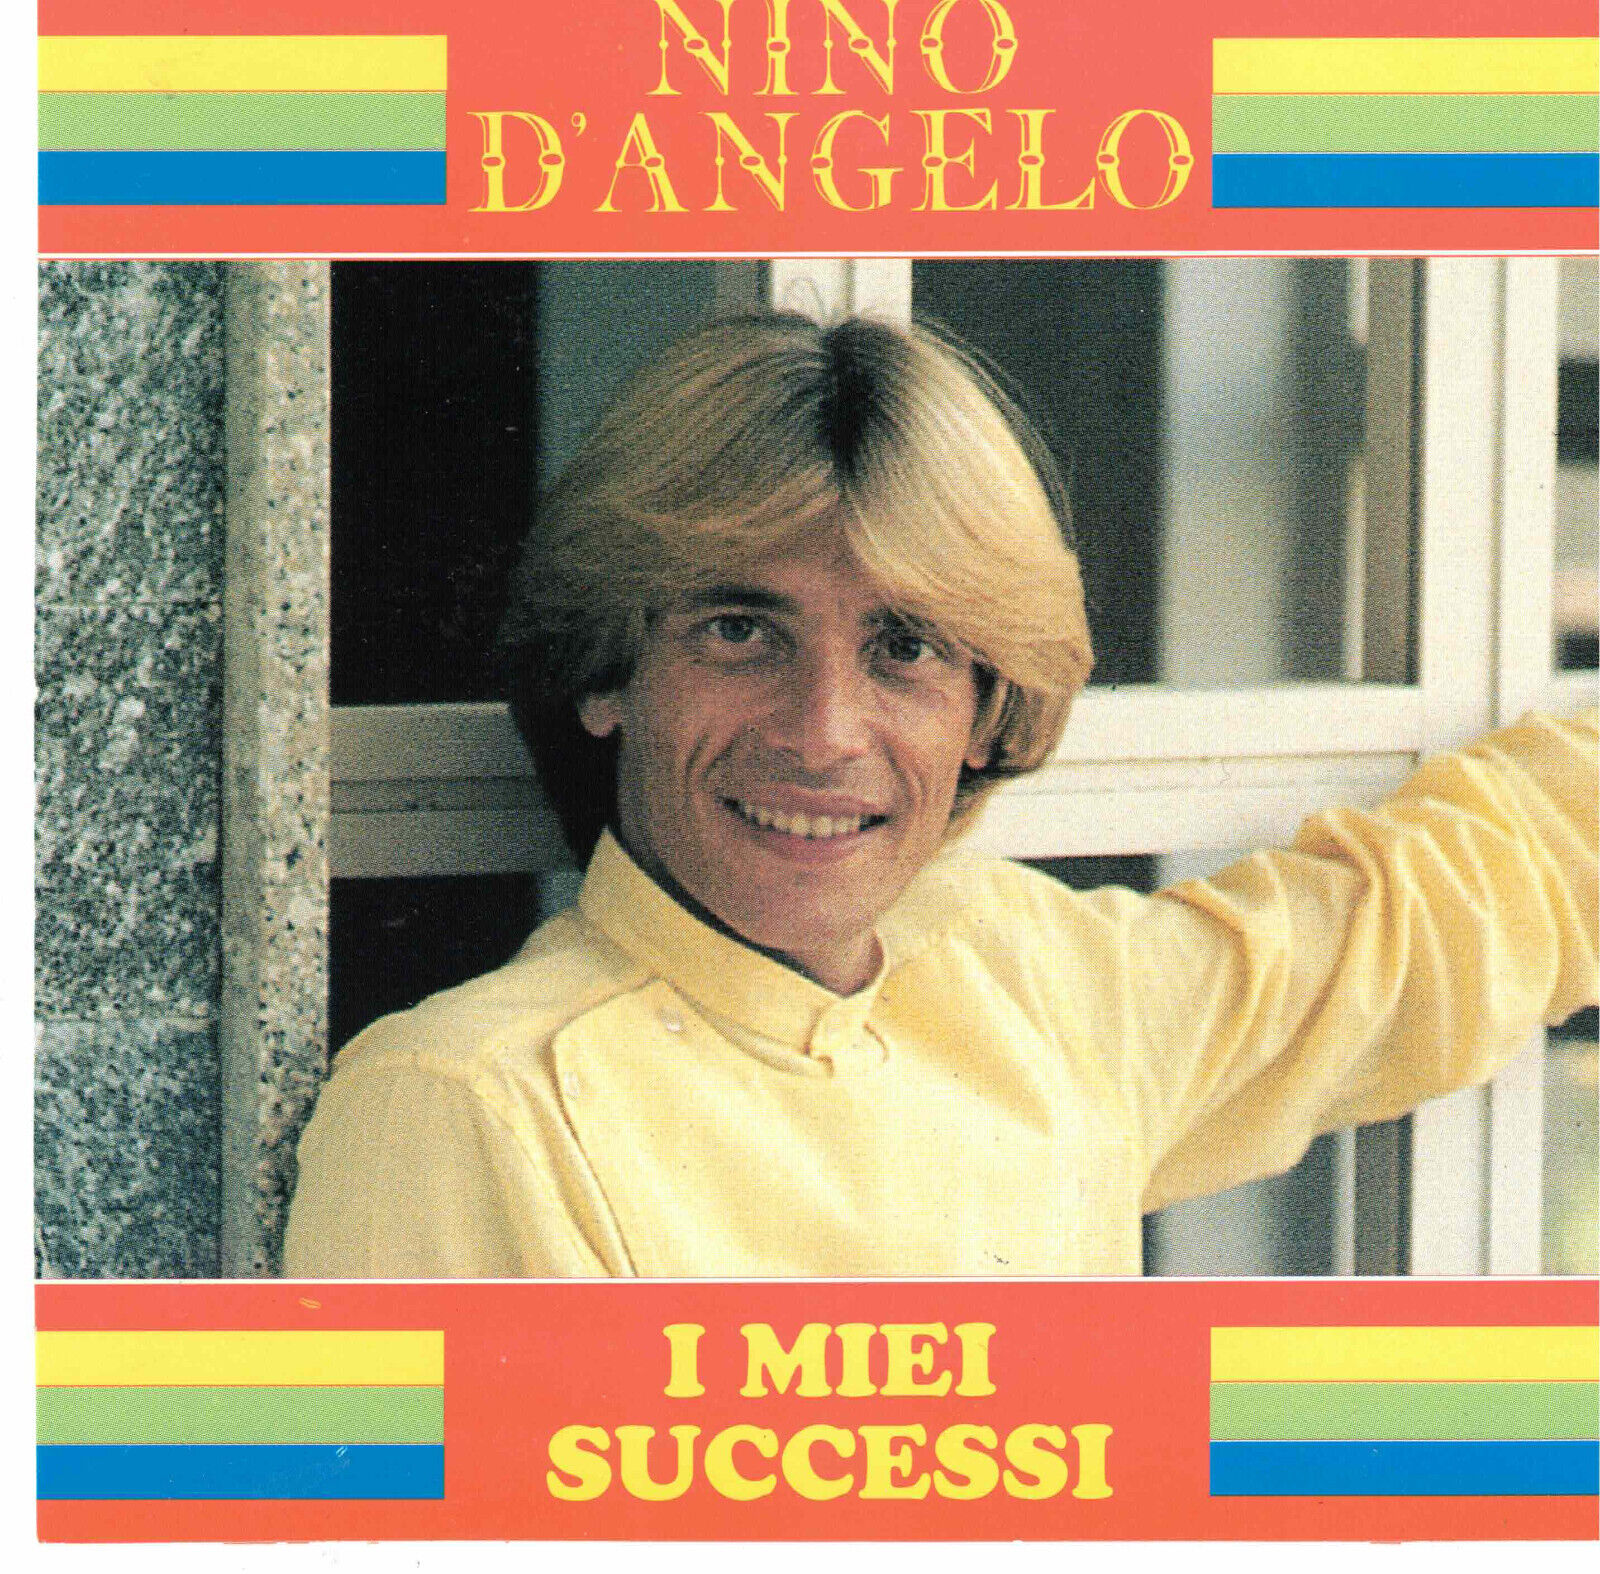 I Miei Successi by Nino D'Angelo (CD, 1996 Bebas/Duck) San Remo Star/Best of